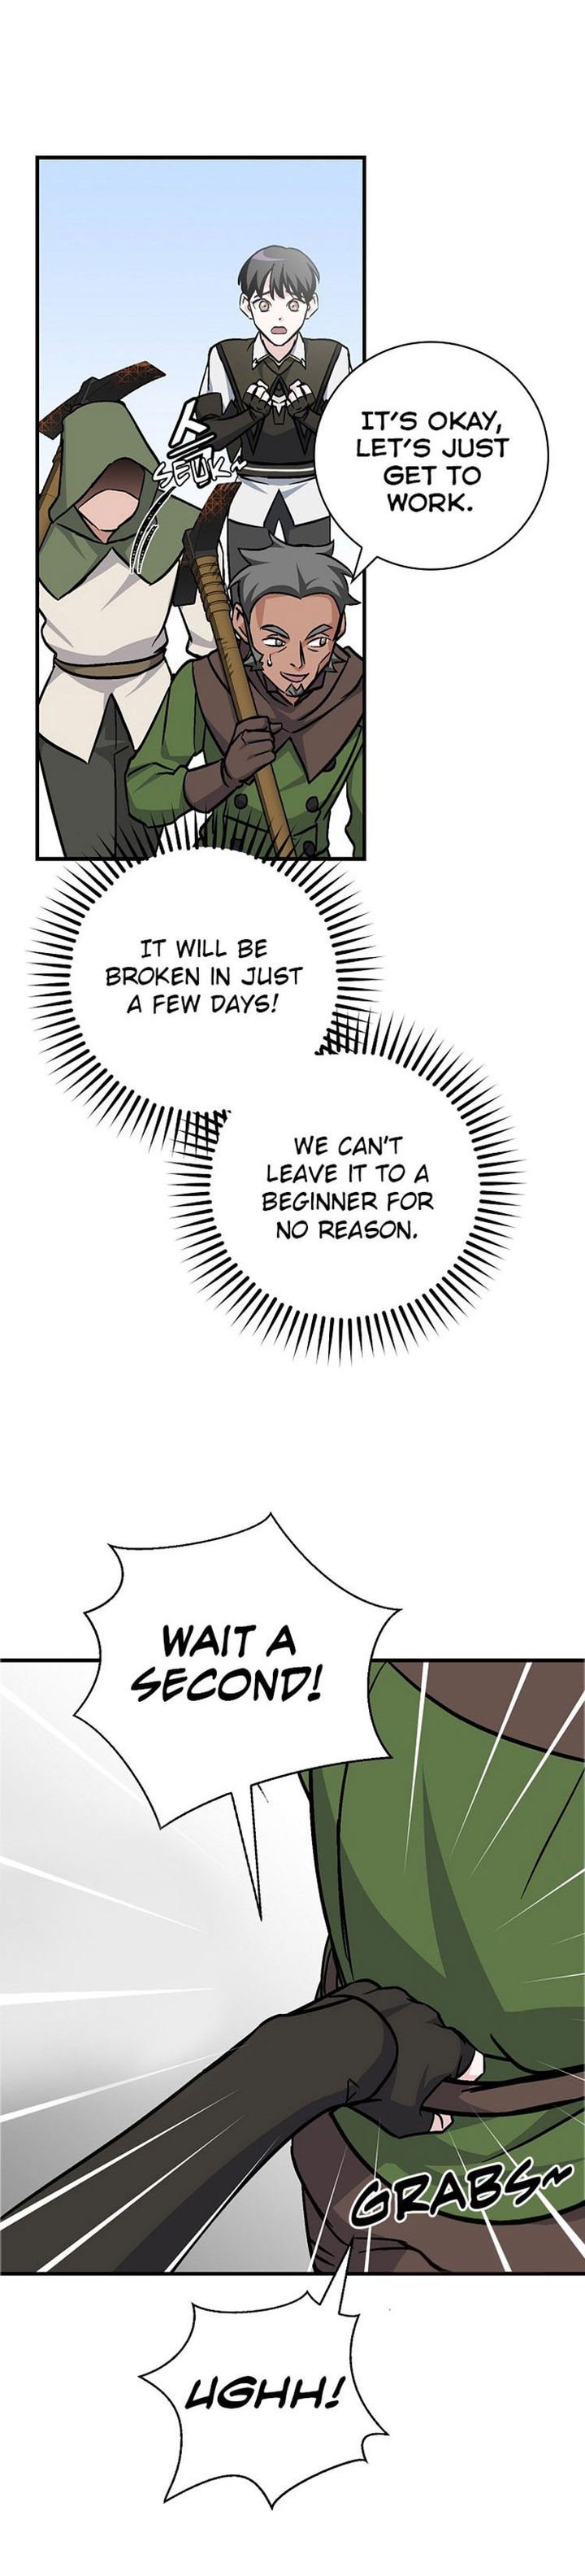 leveling-up-by-only-eating-chap-36-35